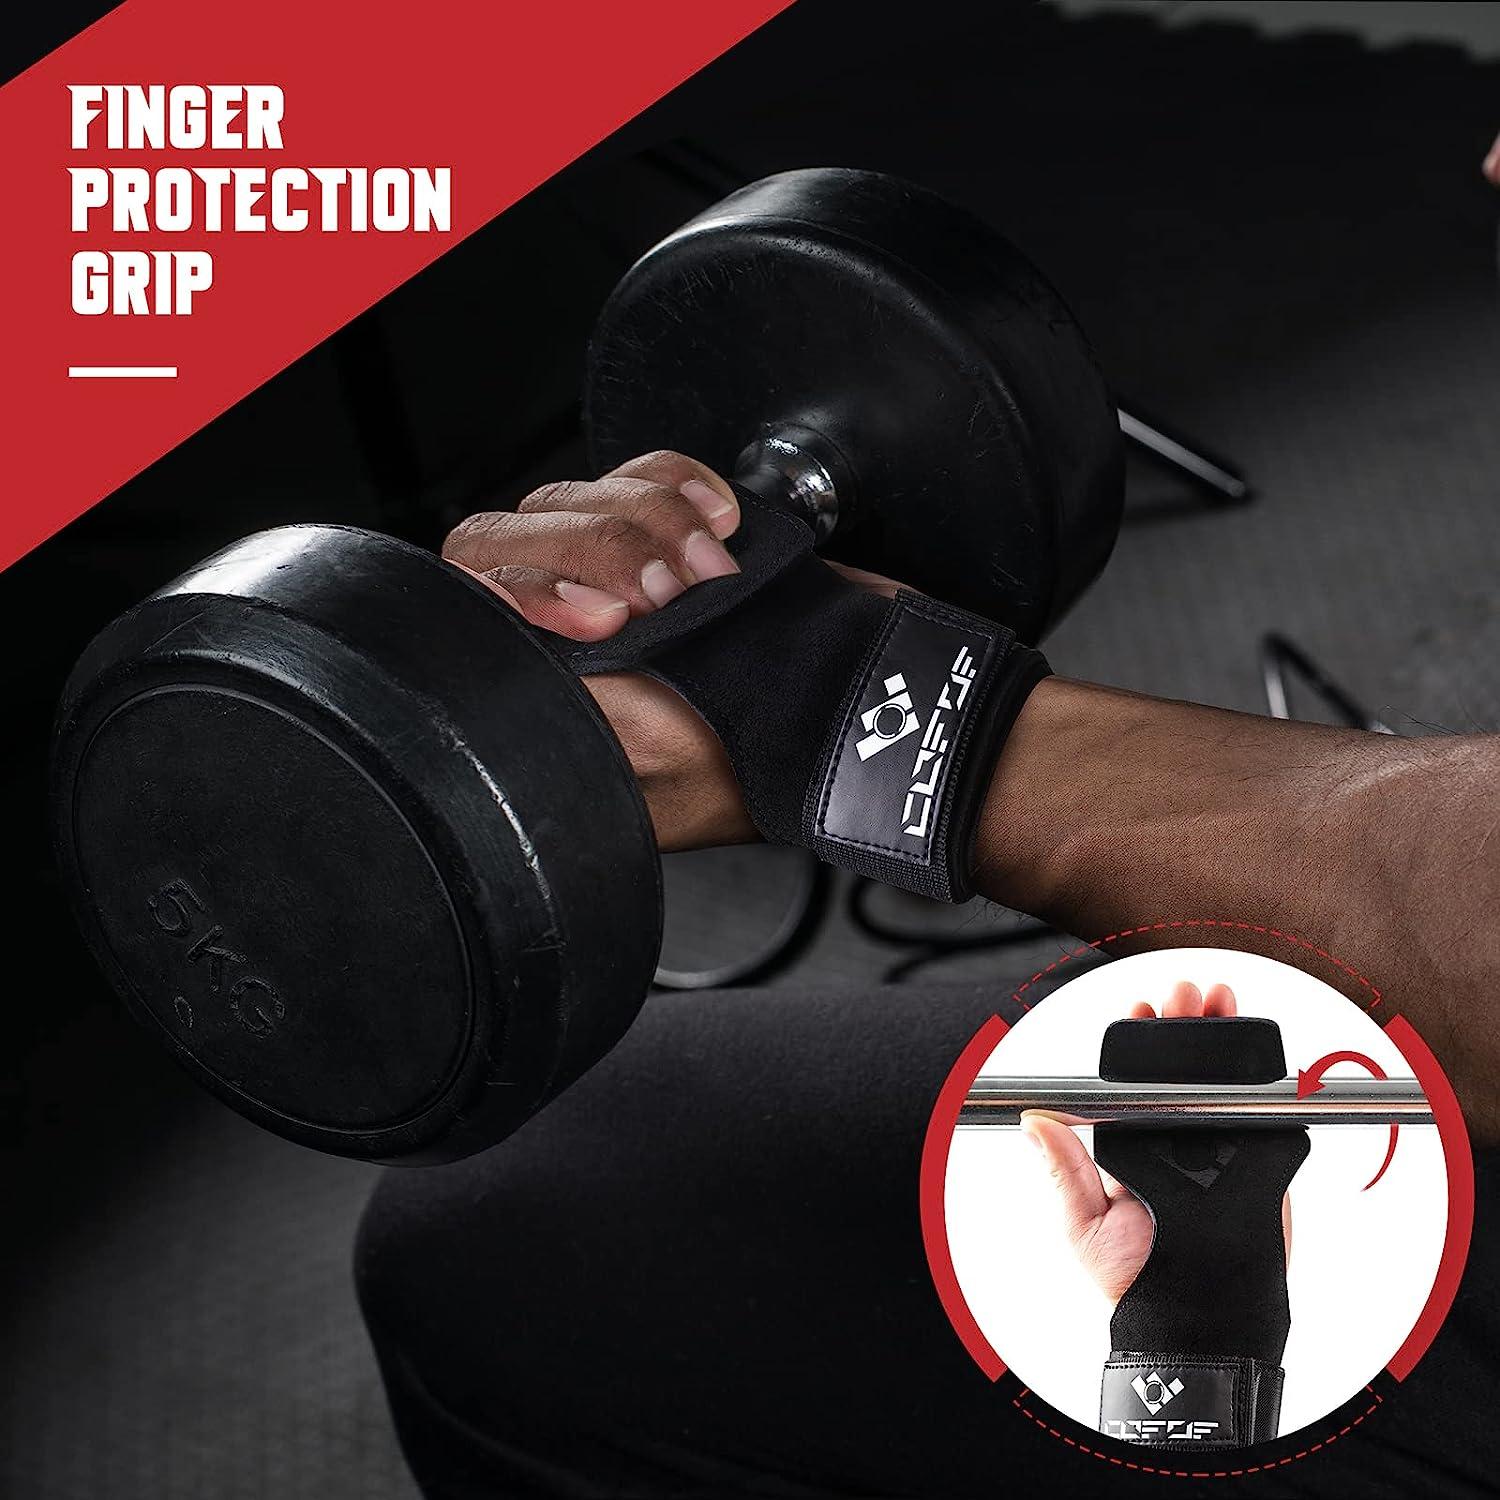 COFOF Weight Lifting Wrist Strap,Double Layer Leather